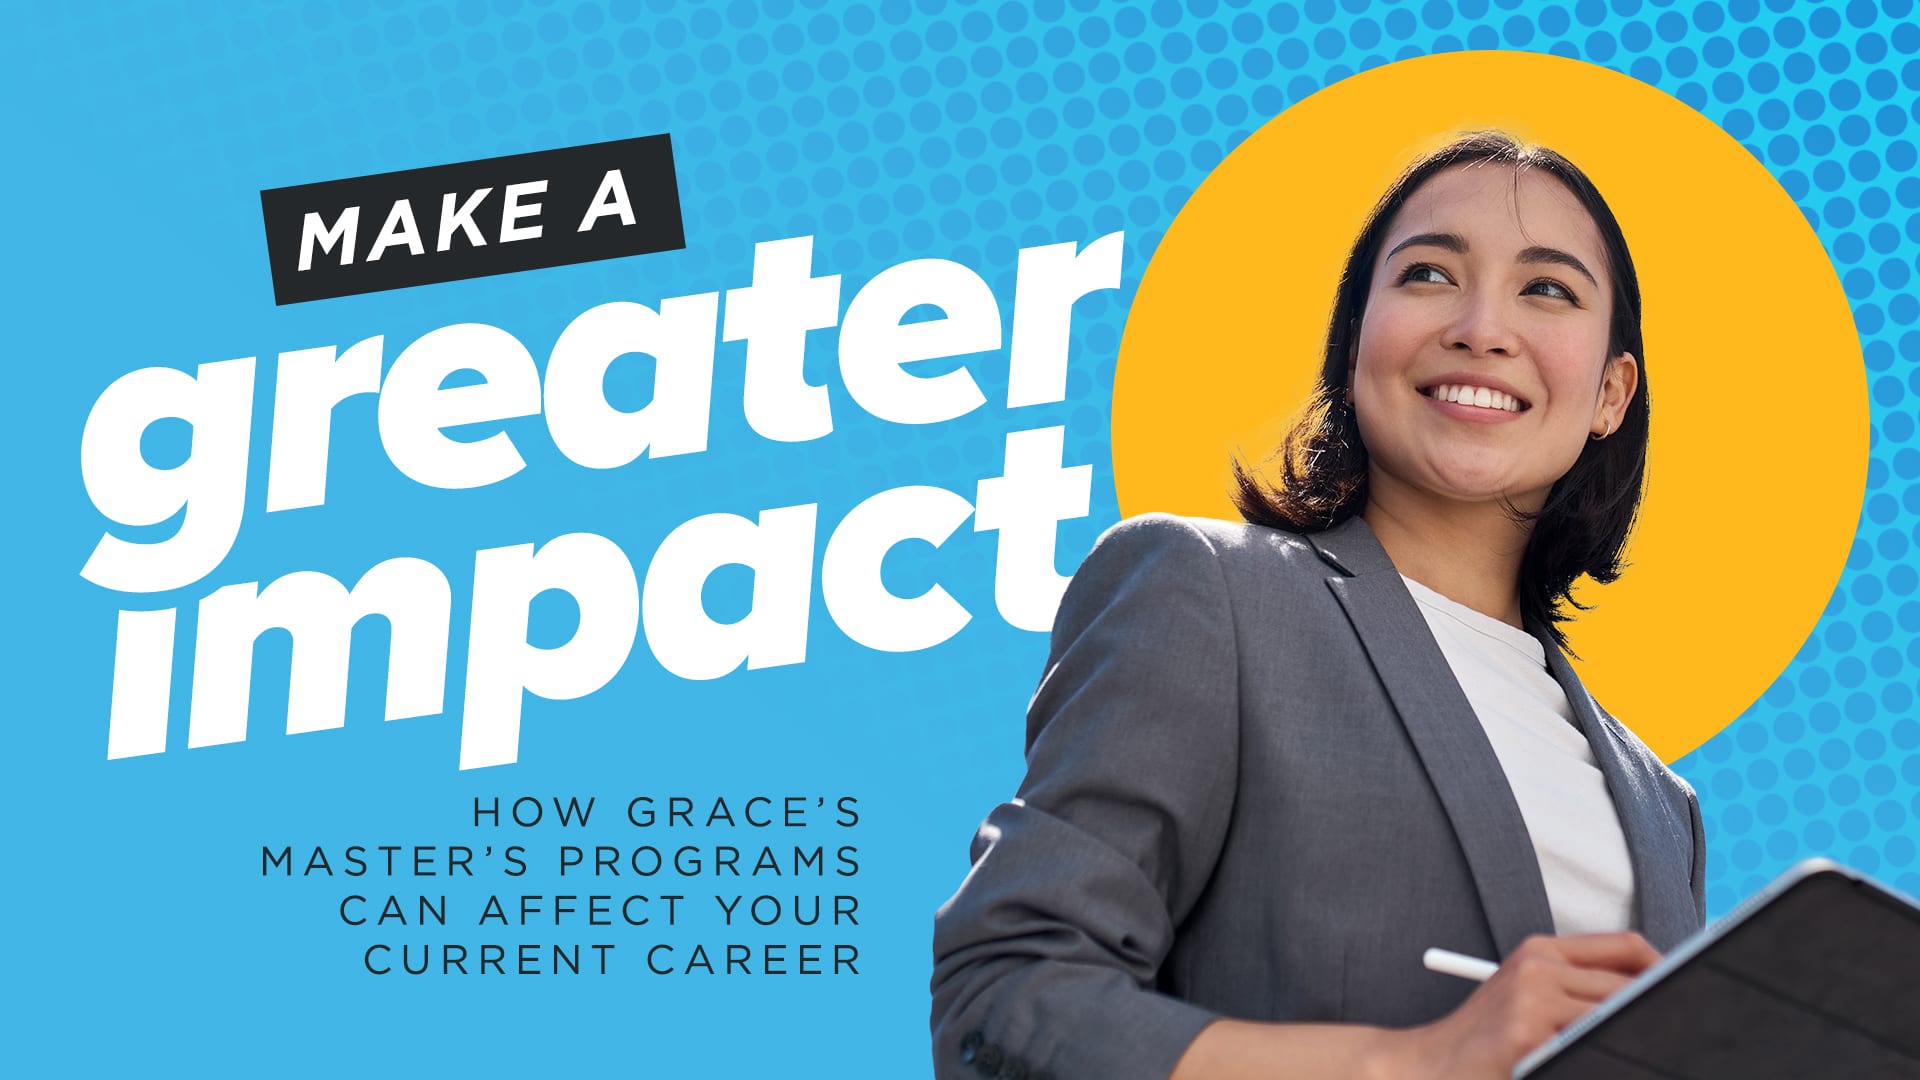 Make a Greater Impact – How Grace's Master's Programs Can Affect Your Current Career